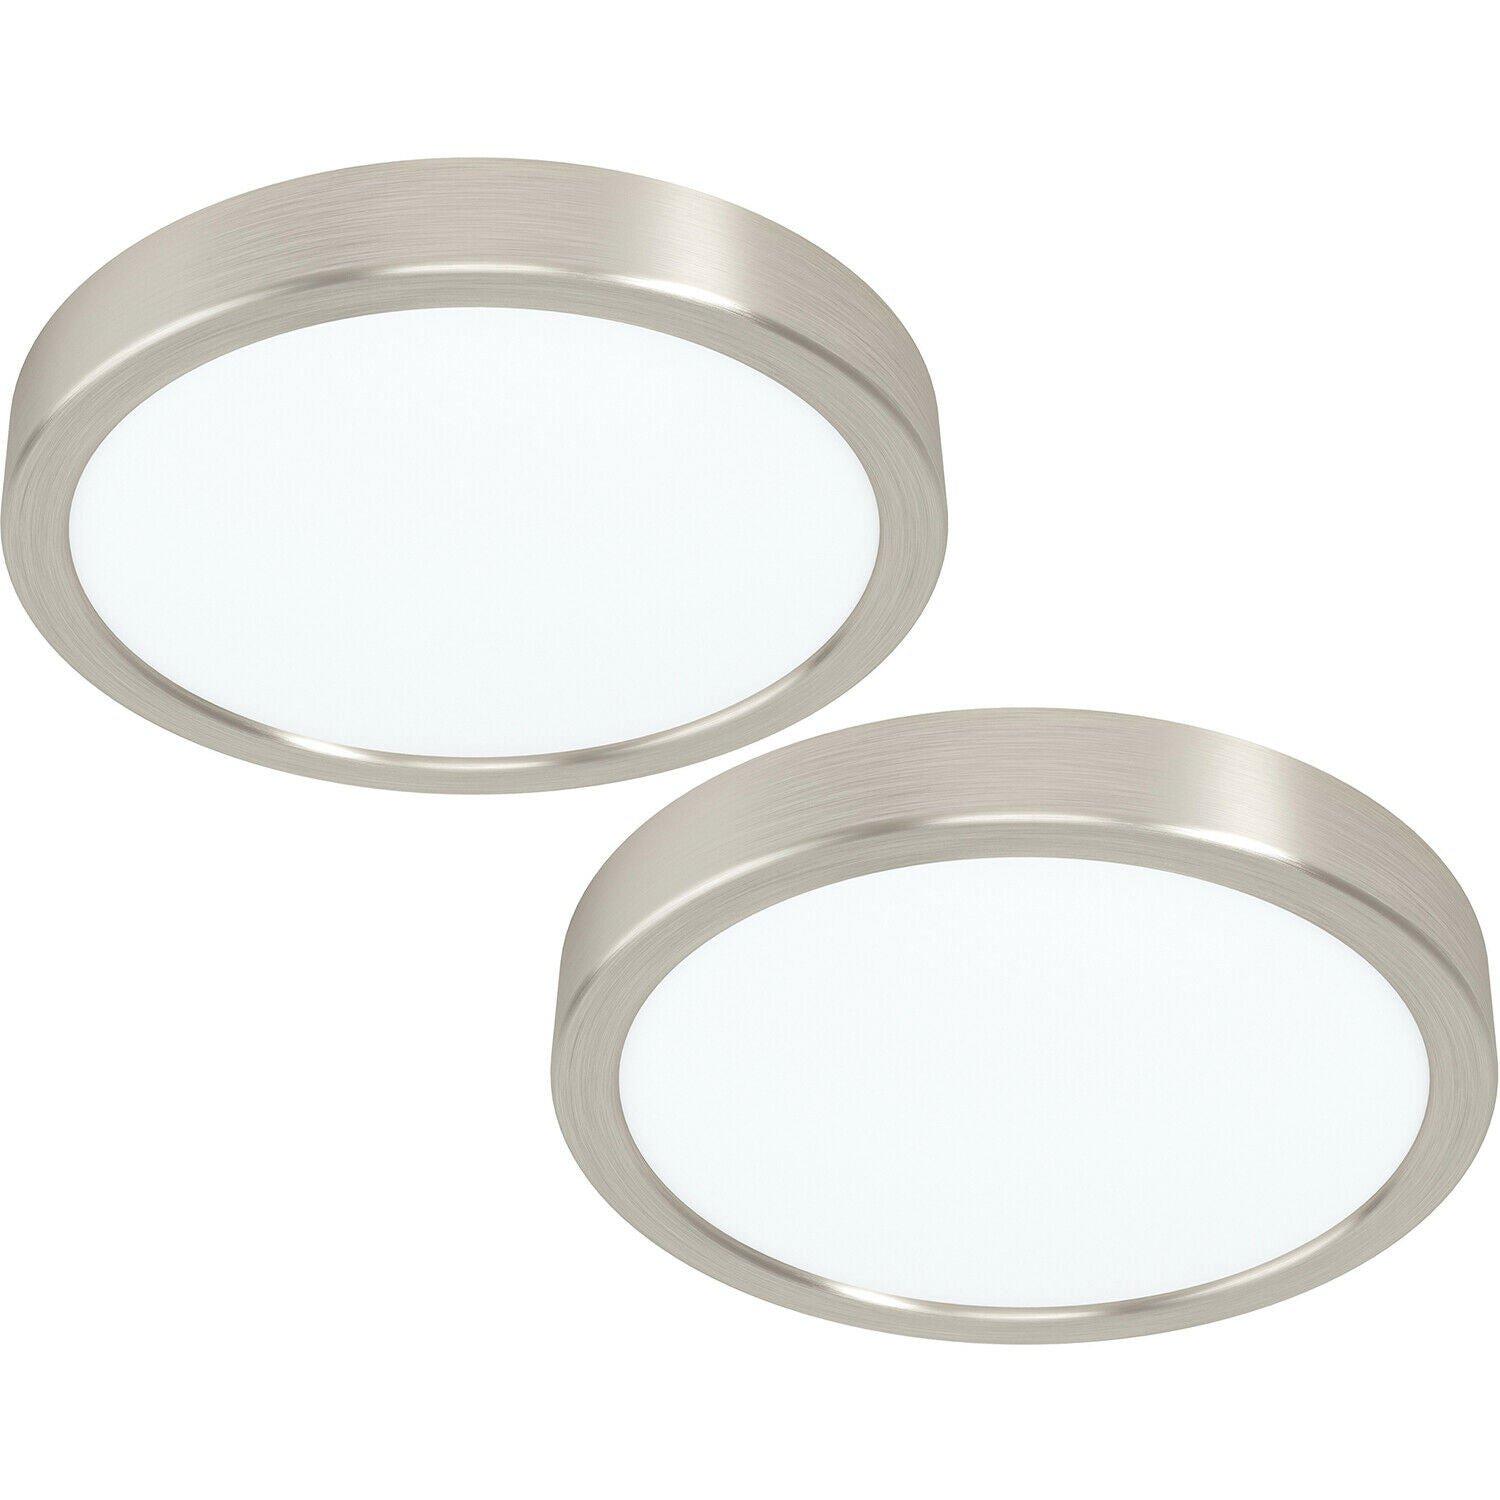 2 PACK Wall / Ceiling Light Satin Nickel 210mm Round Surface 16.5W LED 4000K